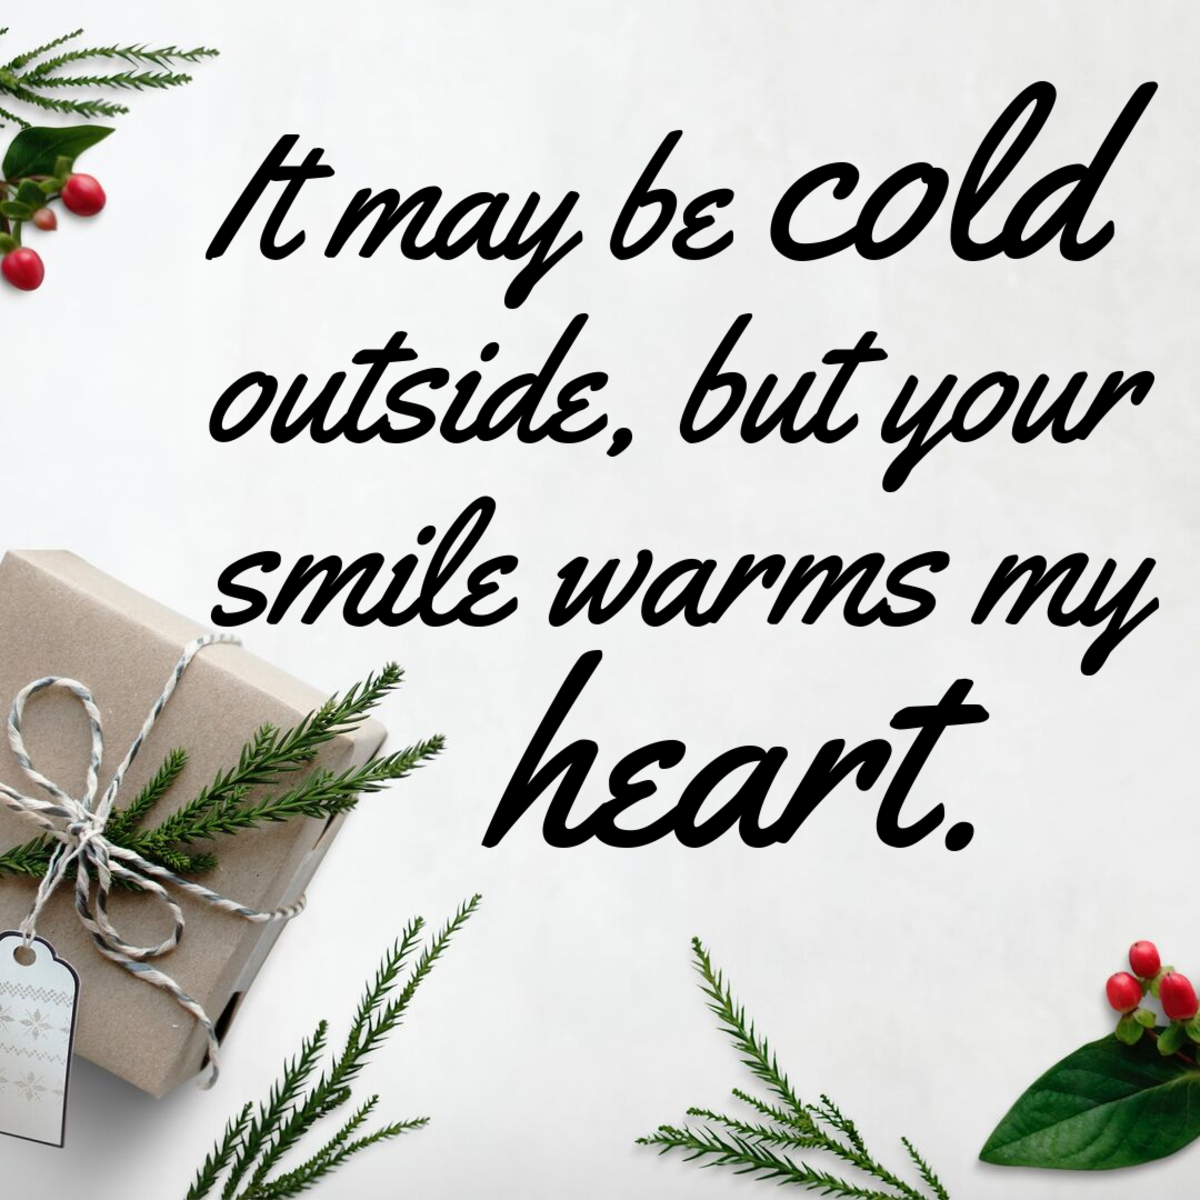 It may be cold outside, but your smile warms my heart.